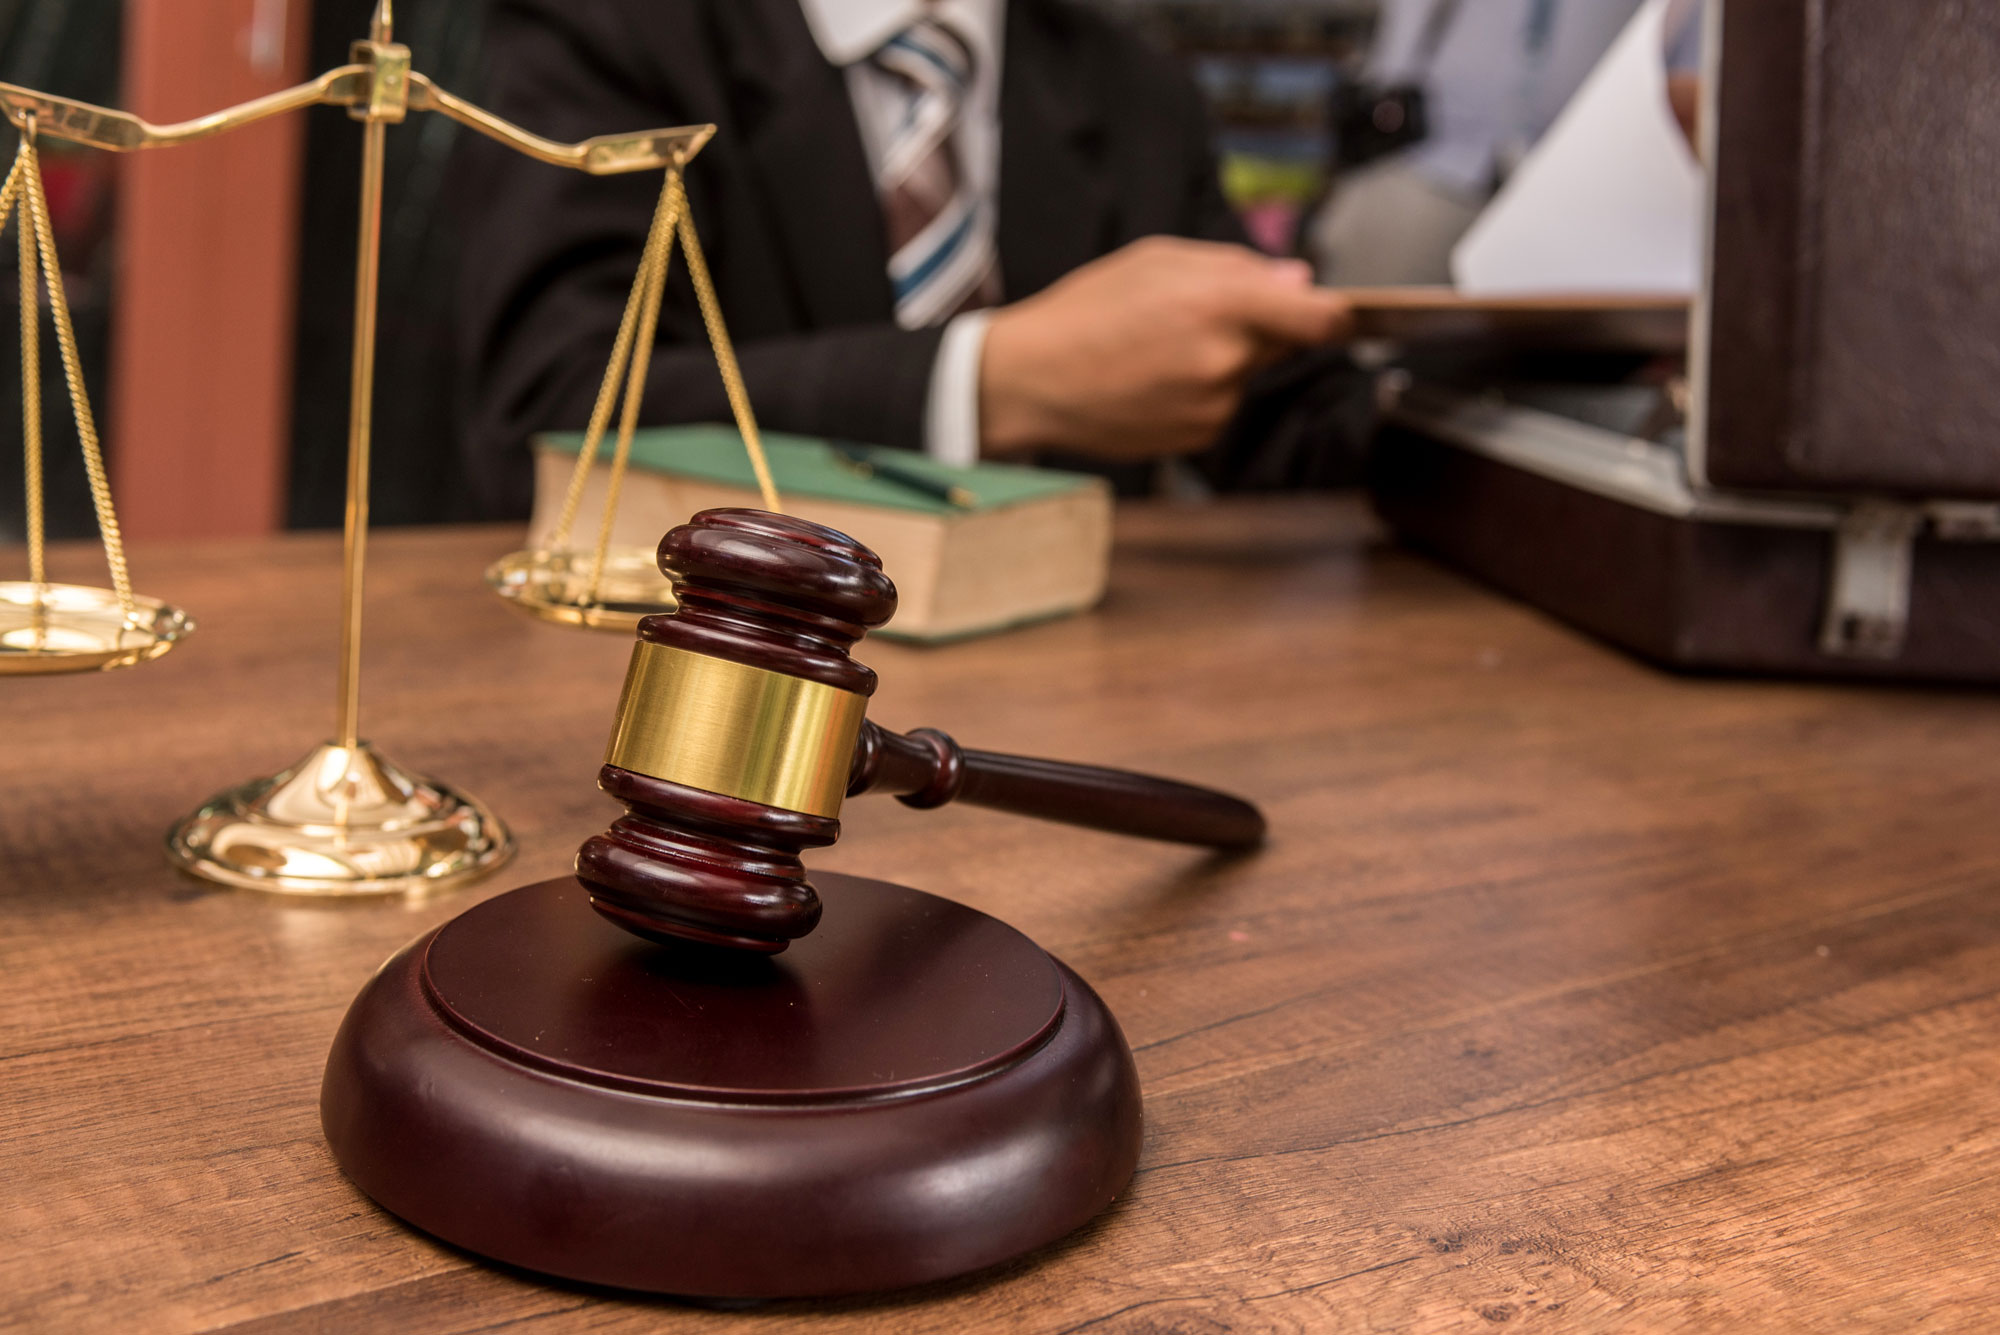 A stock photo of a table with a gavel, the scales of justice, a book, and an open briefcase that a lawyer is taking a file out of